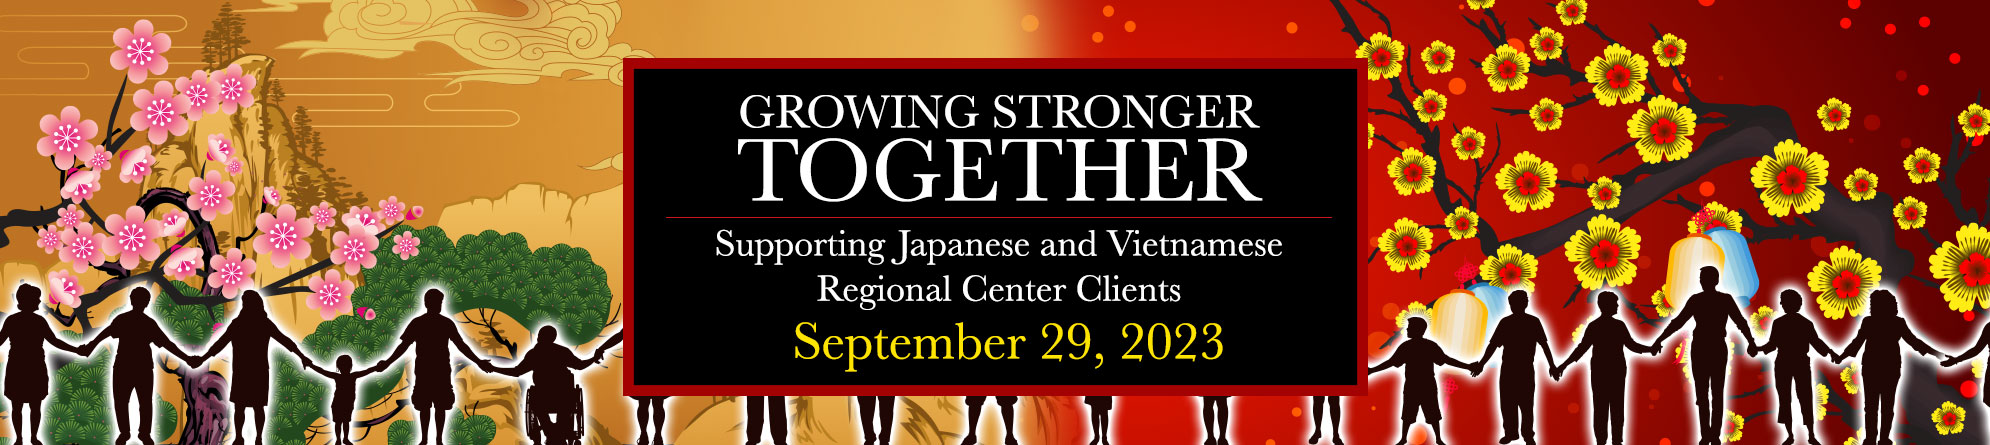 Text: Growing Stronger Together: Supporting Japanese & Vietnamese Regional Center Clients. Illustration: Shows a cherry blossom tree on the left and a plum tree on the right.